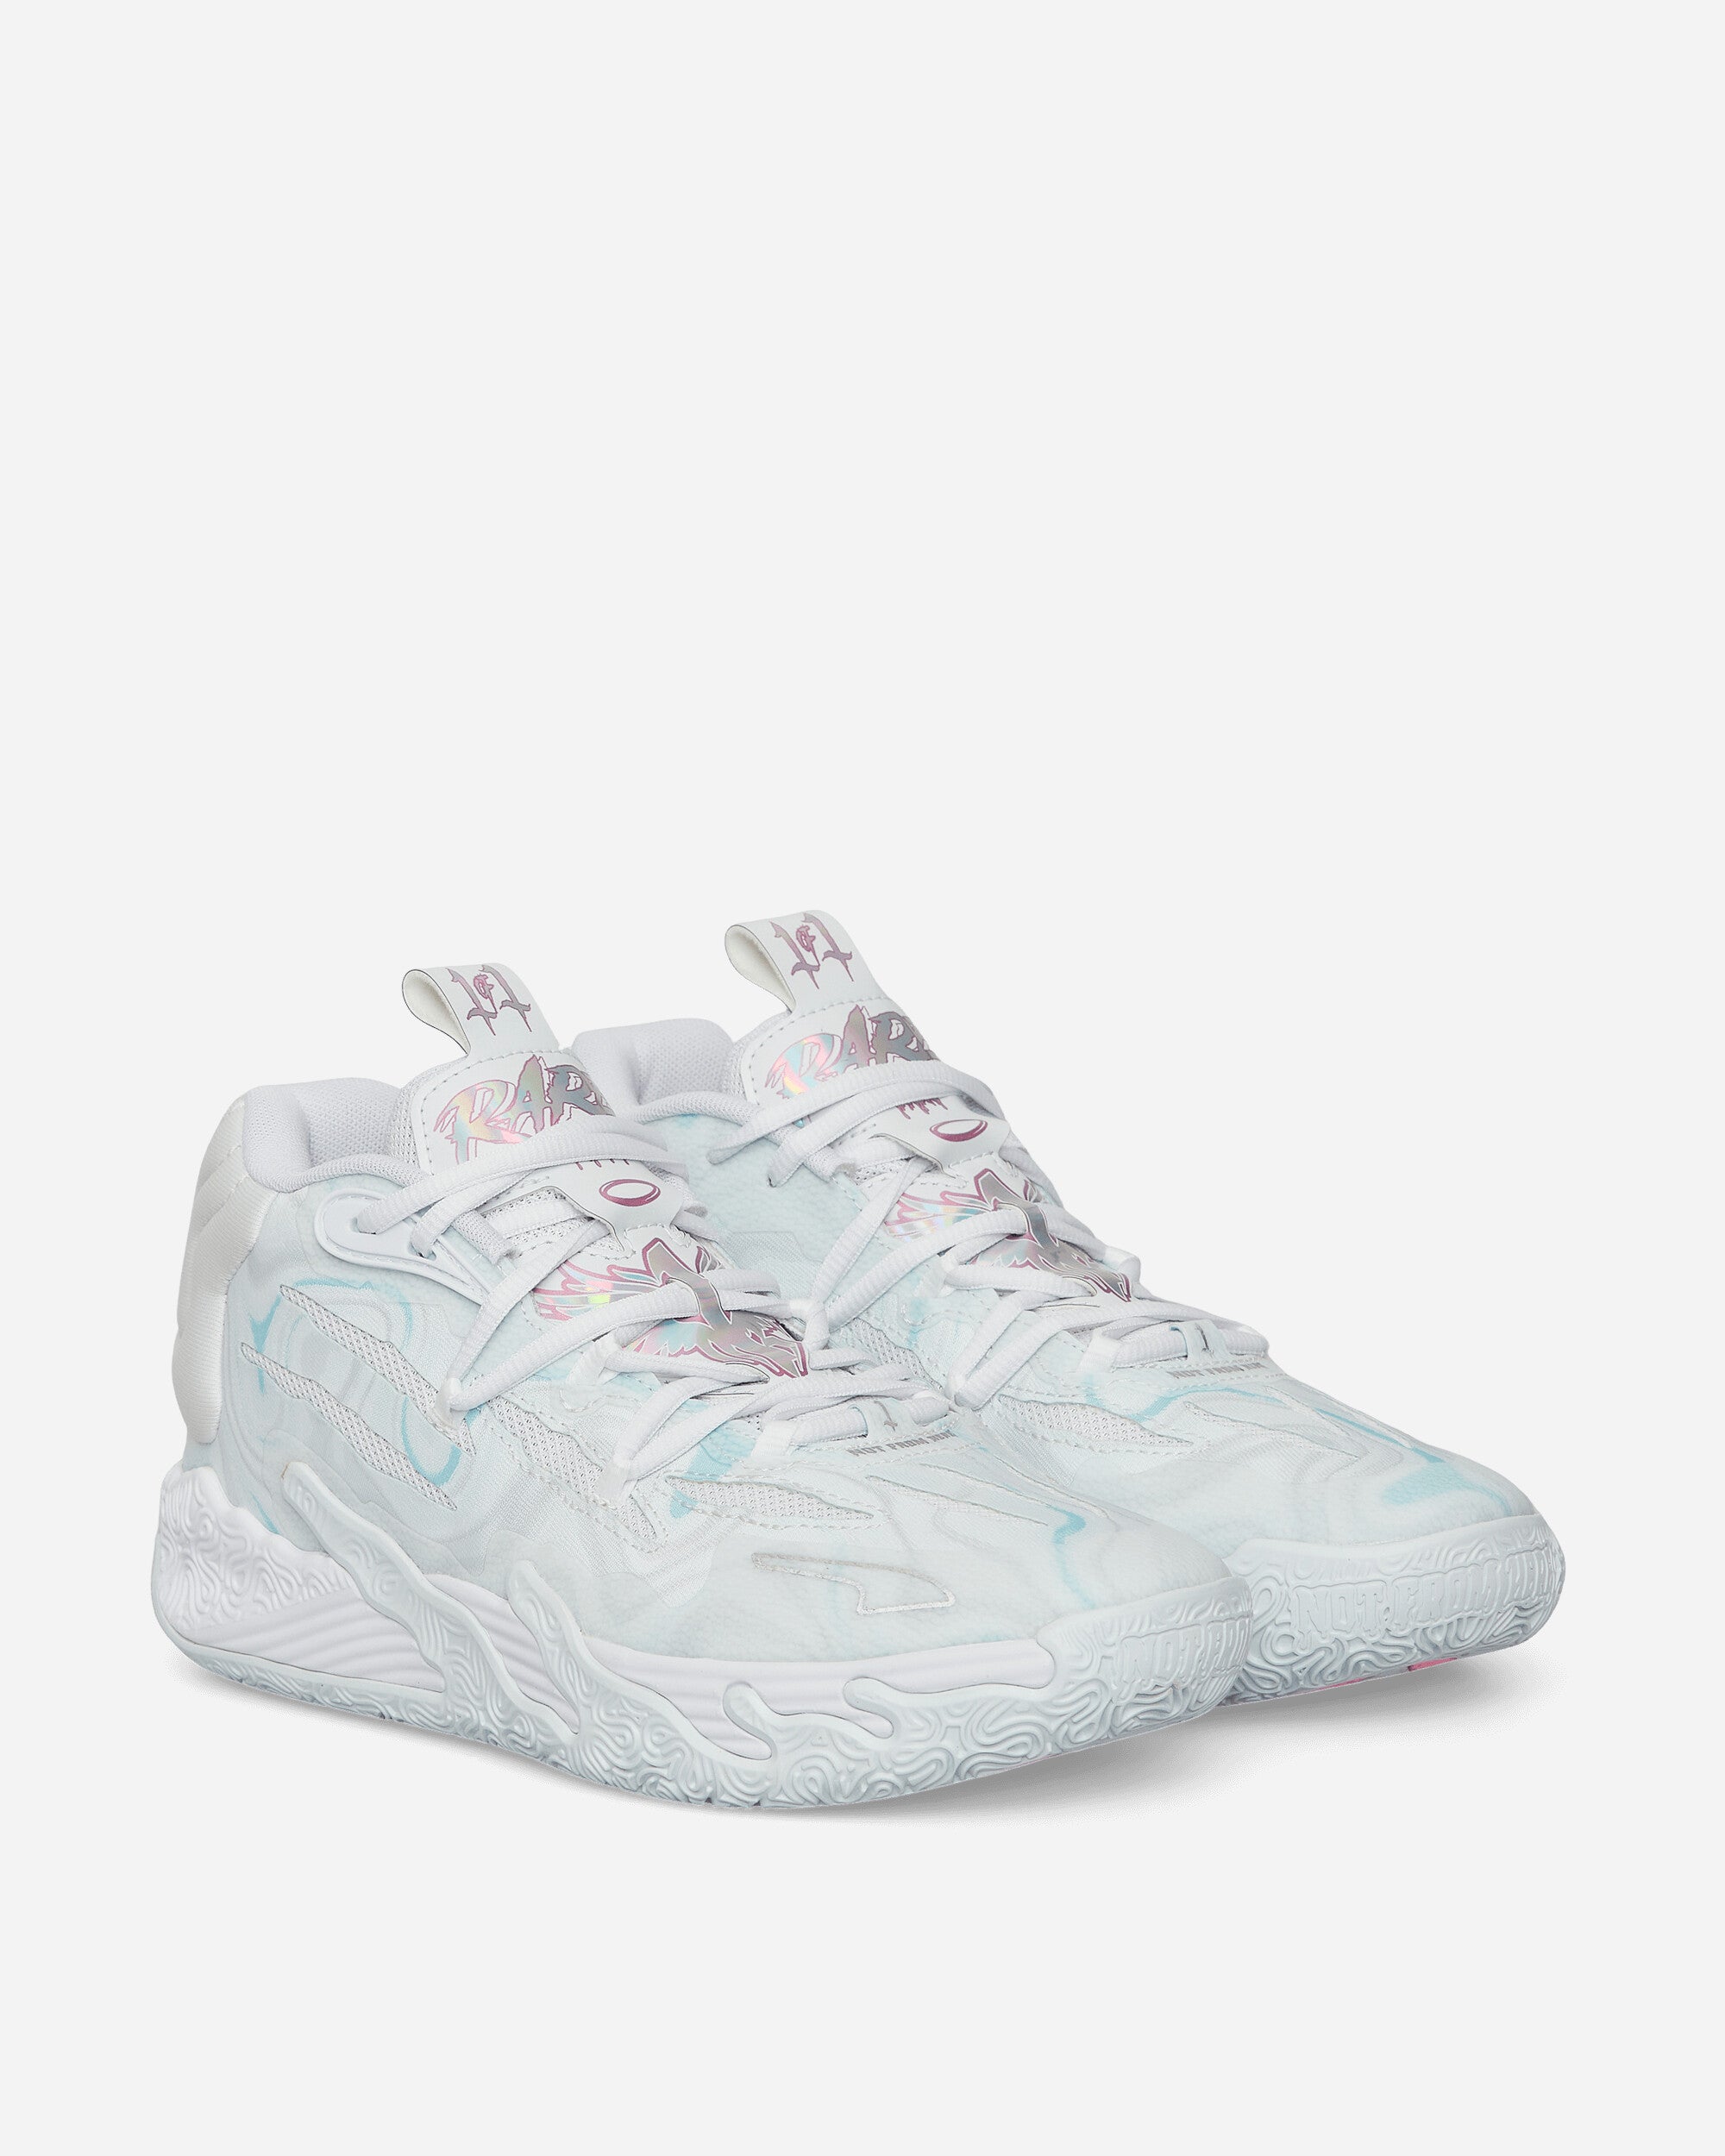 Puma Mb.03 Iridescent Puma White/Dewdrop Sneakers Low 379904-01